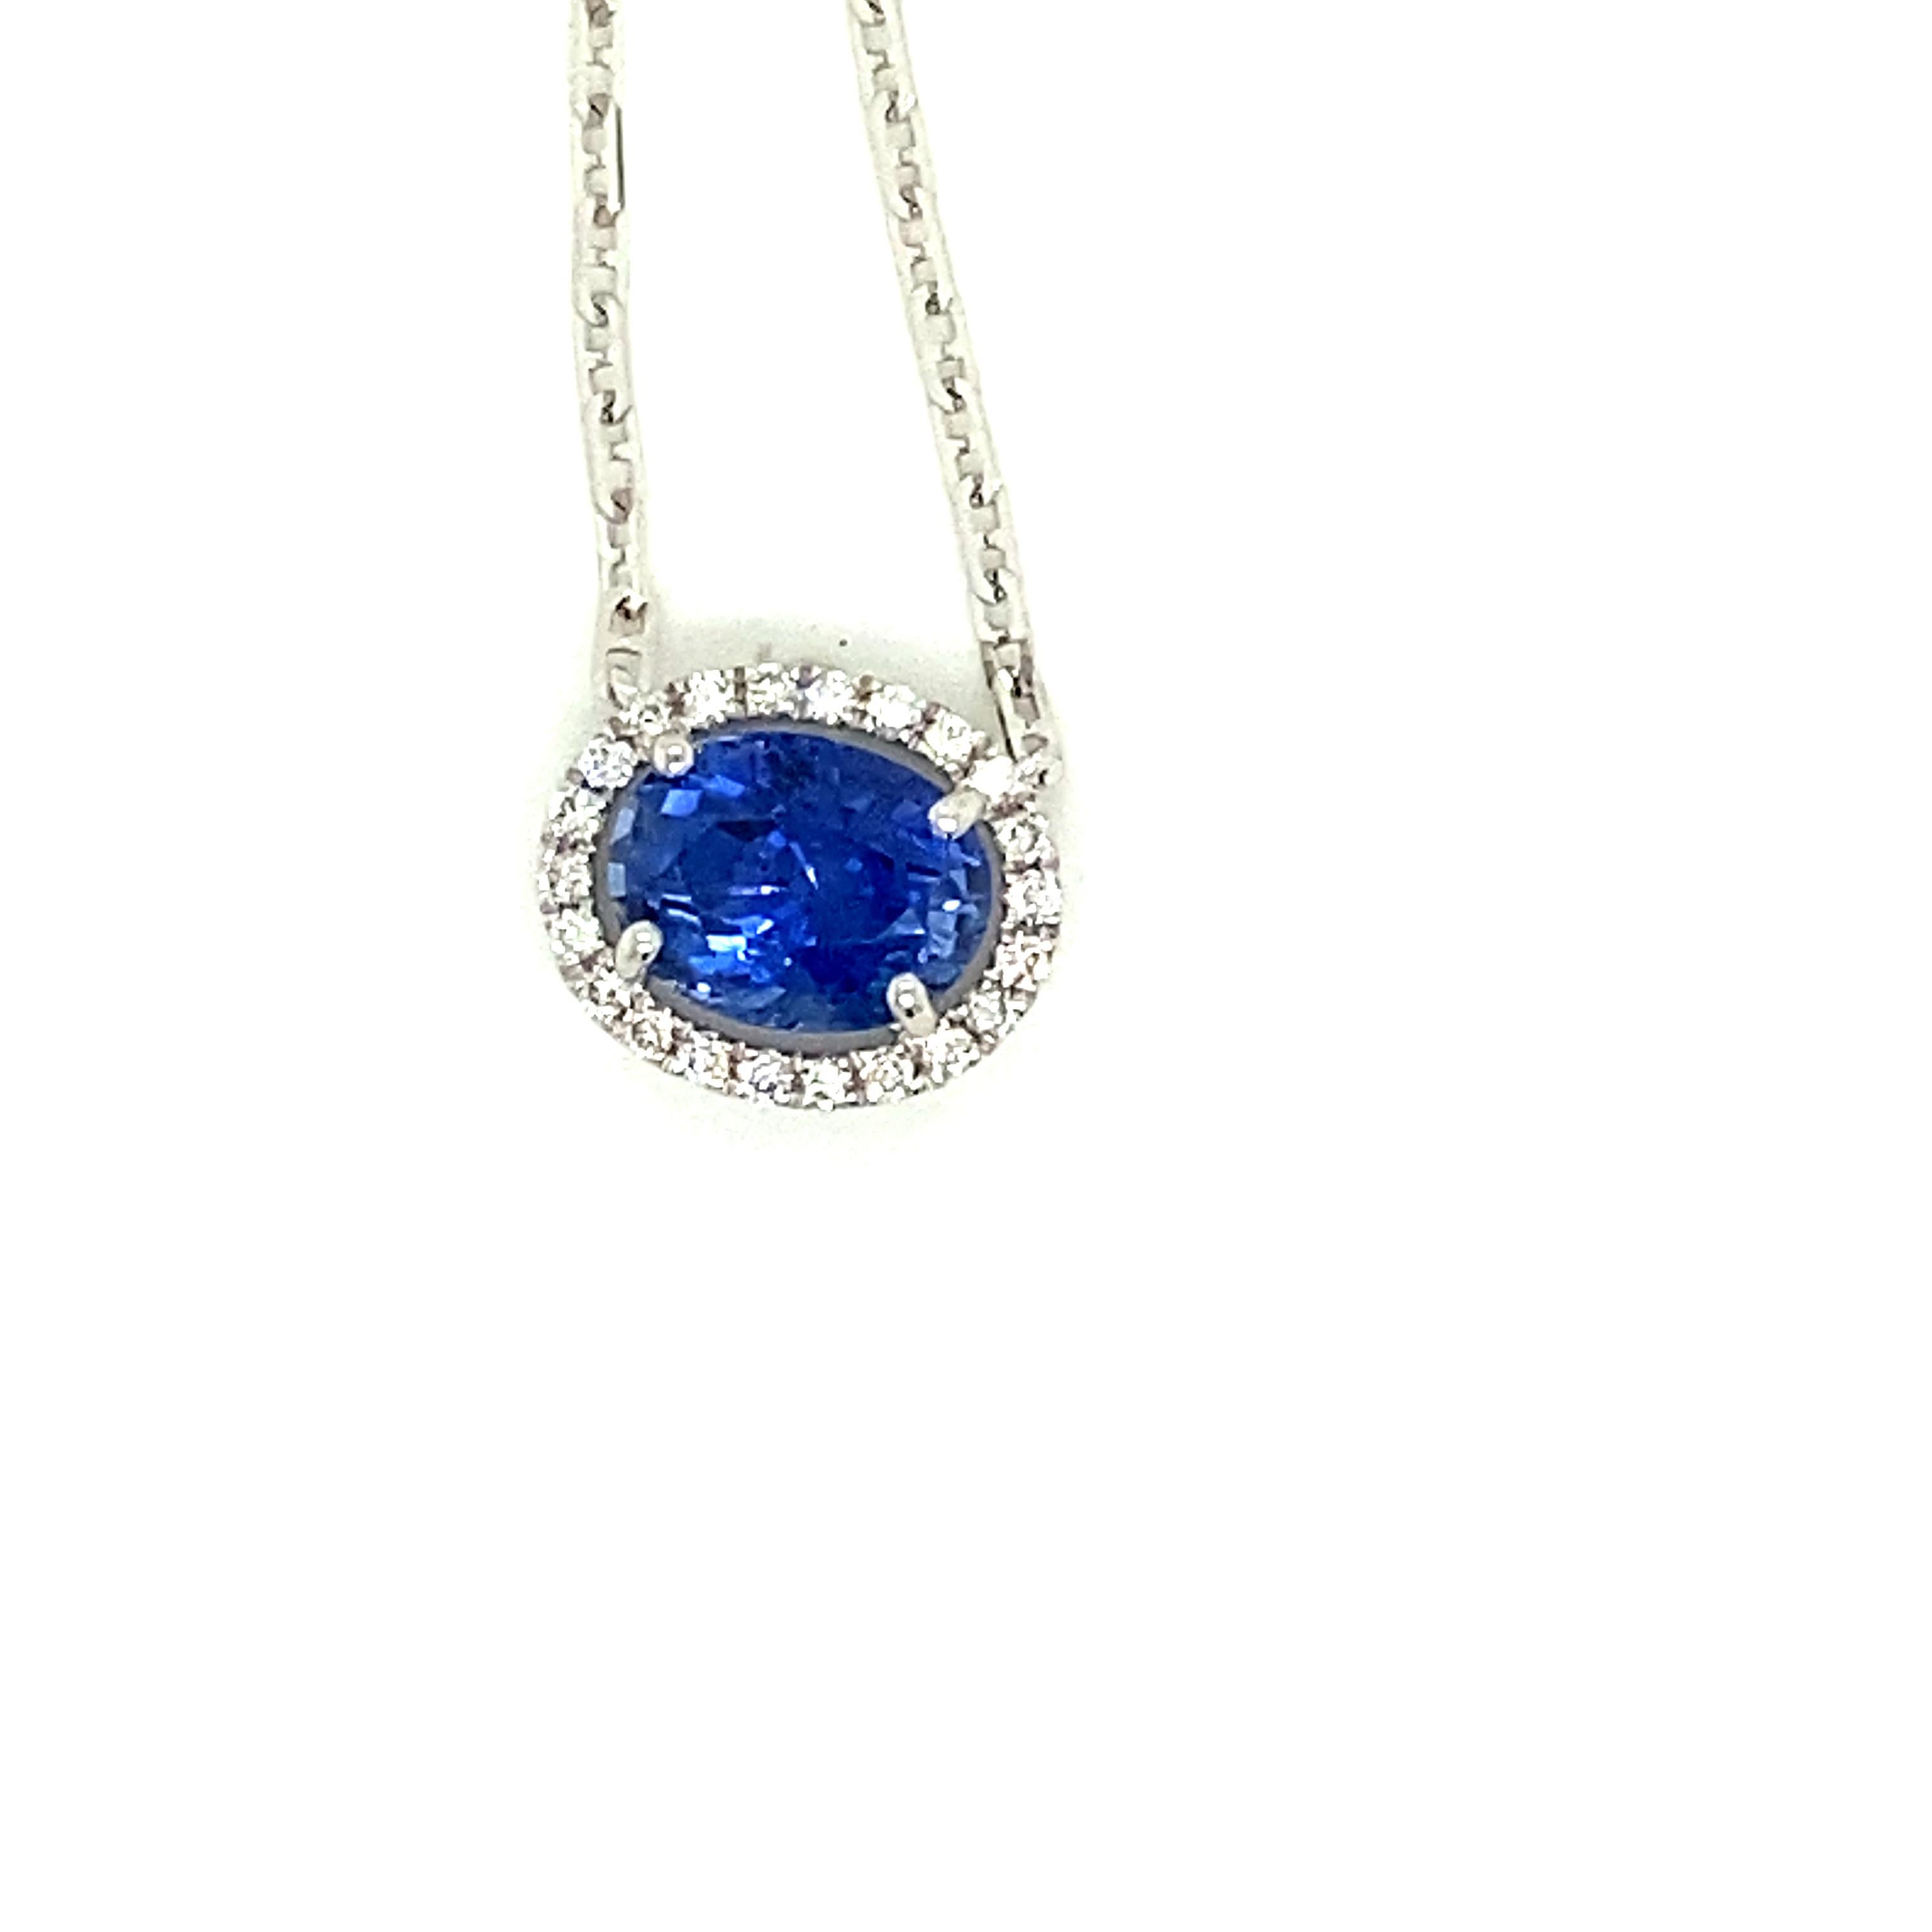 1.82 Carat Oval-Cut Vivid Blue Sapphire and White Diamond Pendant Necklace:

A beautiful pendant necklace, it features a 1.82 carat oval-cut vivid blue sapphire in the centre surrounded by a halo of white round-brilliant cut diamonds weighing 0.12